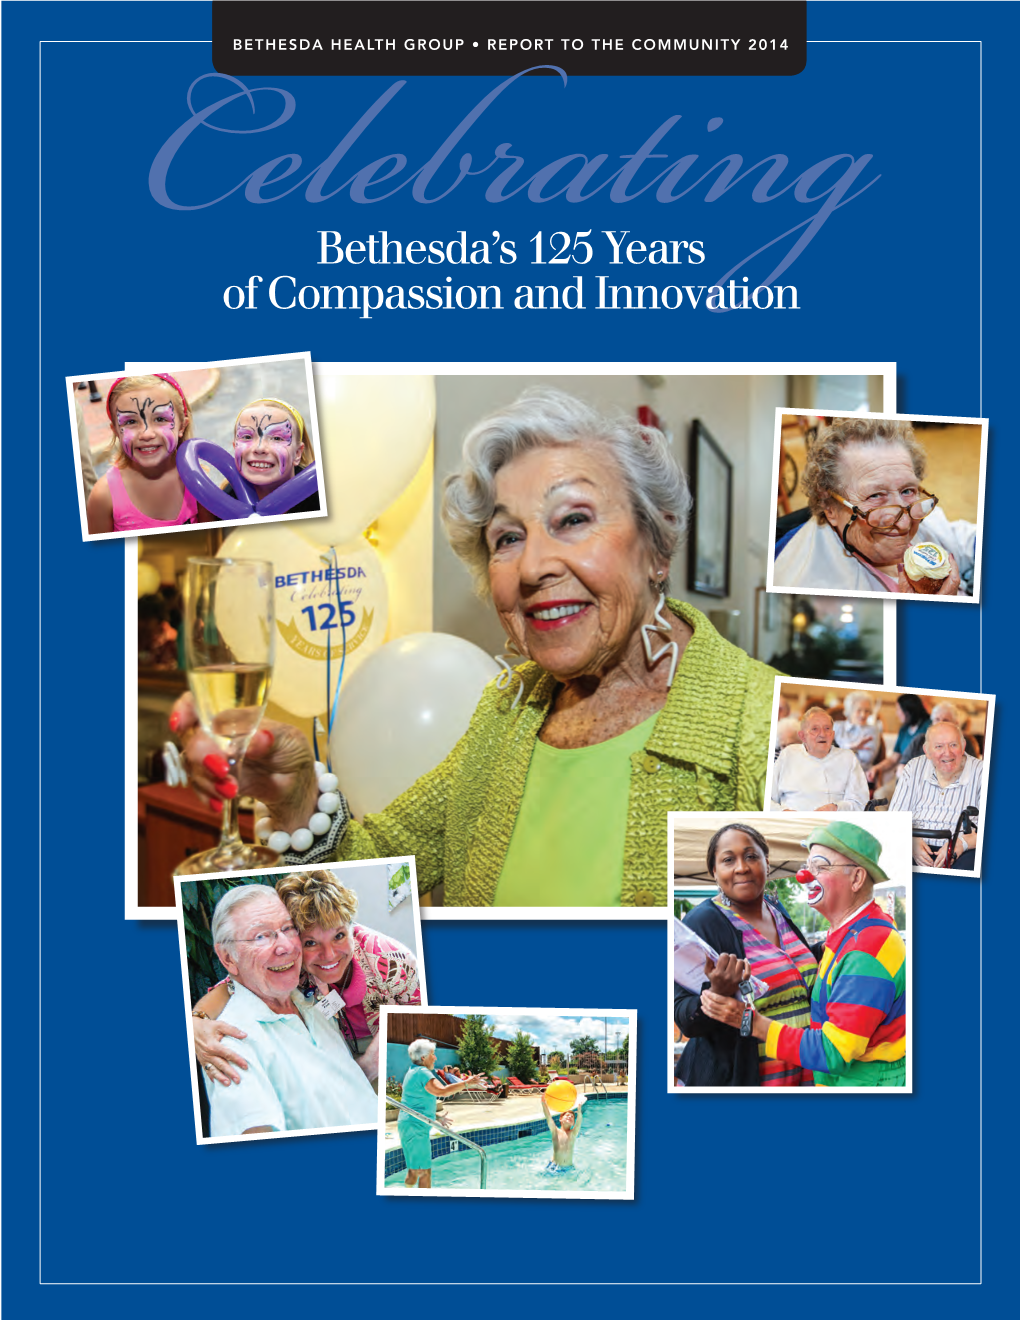 2014 Annual Report to the Community